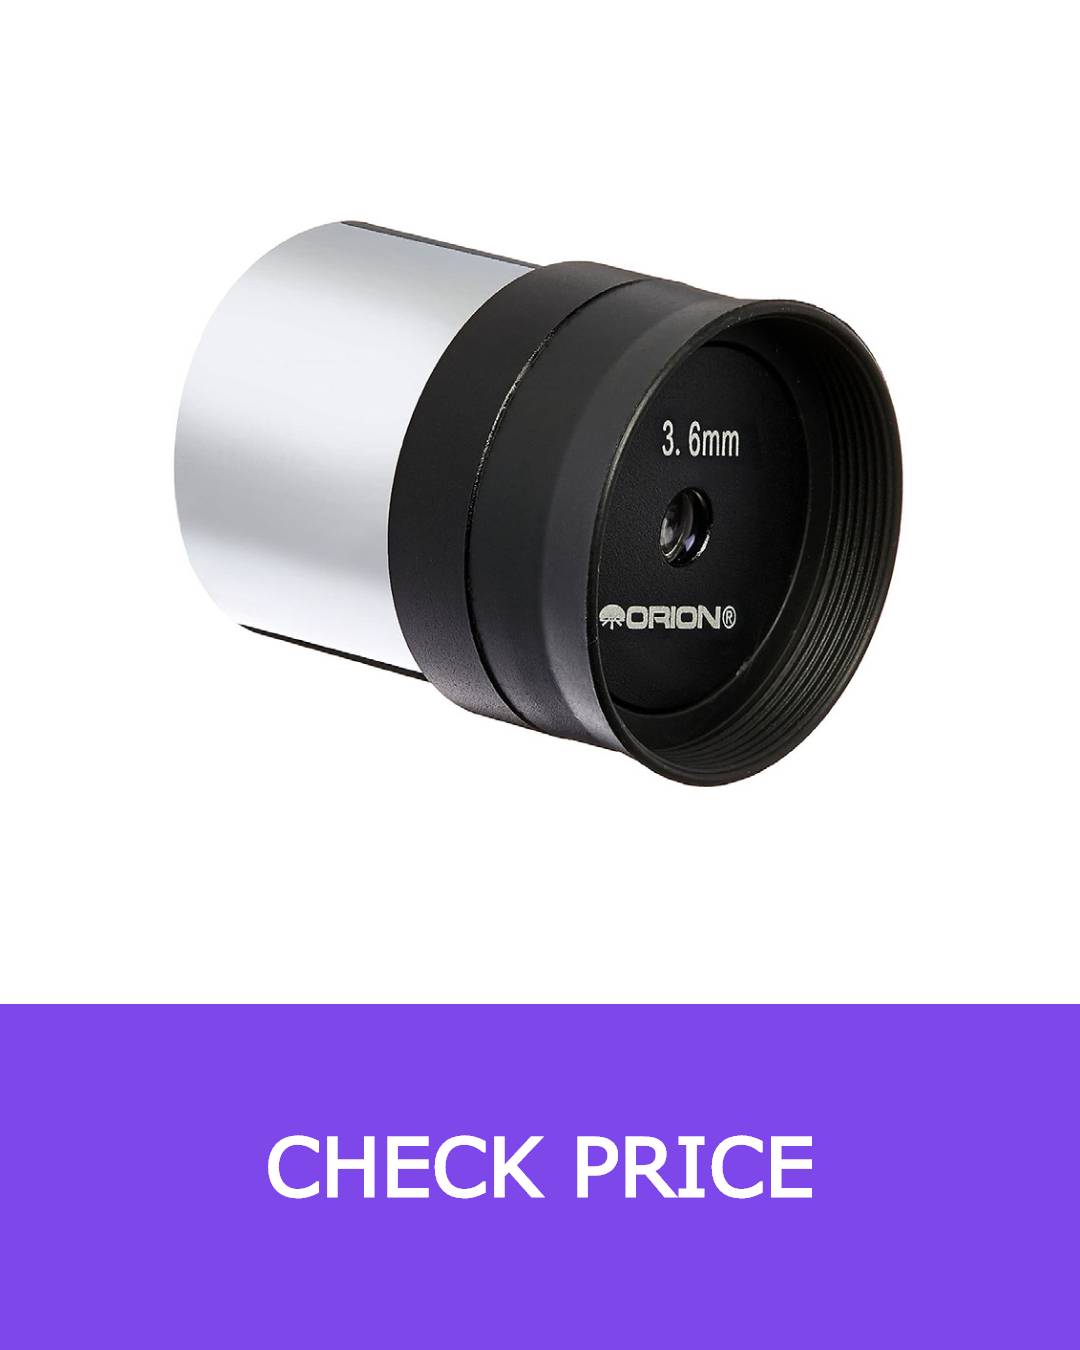 best telescope eyepiece for viewing planets